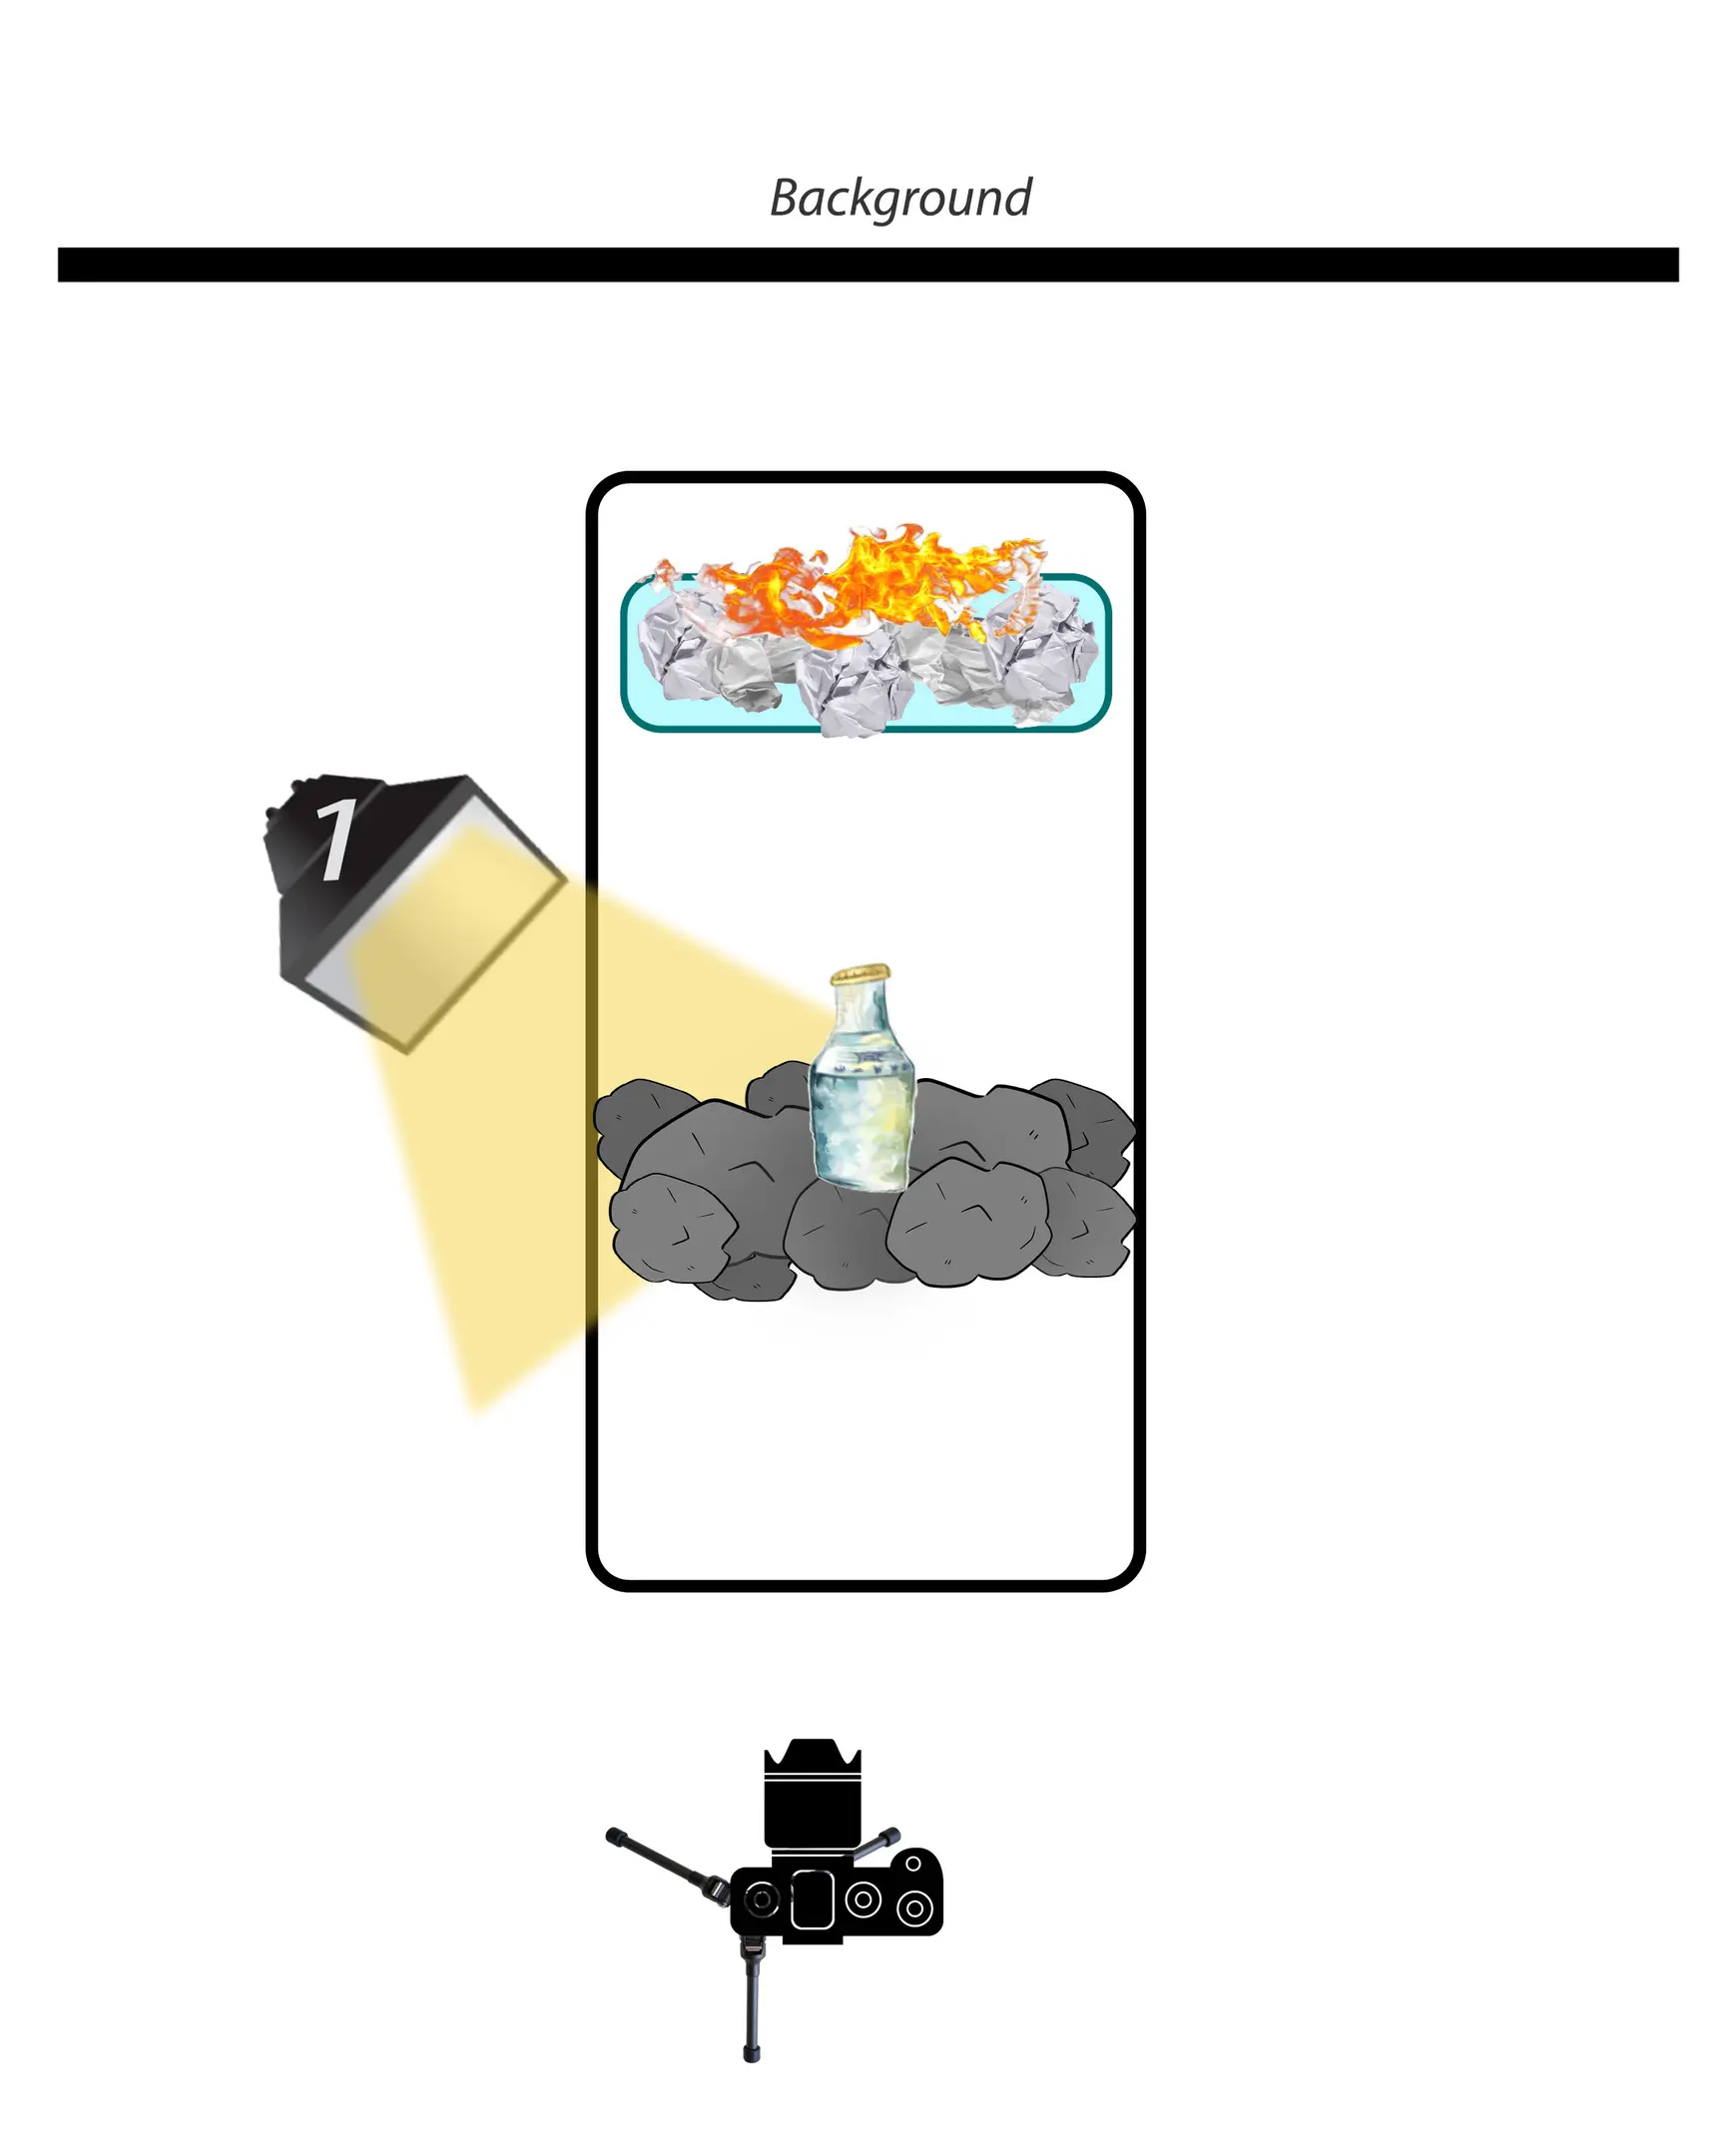 Light Schema 2. This schema shows a bottle standing in the coals, in the background in a glass heat-resistant dish - which is depicted by a blue rectangle with rounded edges - there is a paper that burns. The diagram shows 1 flash and the direction of it glows. As well as the position of the background and the camera.